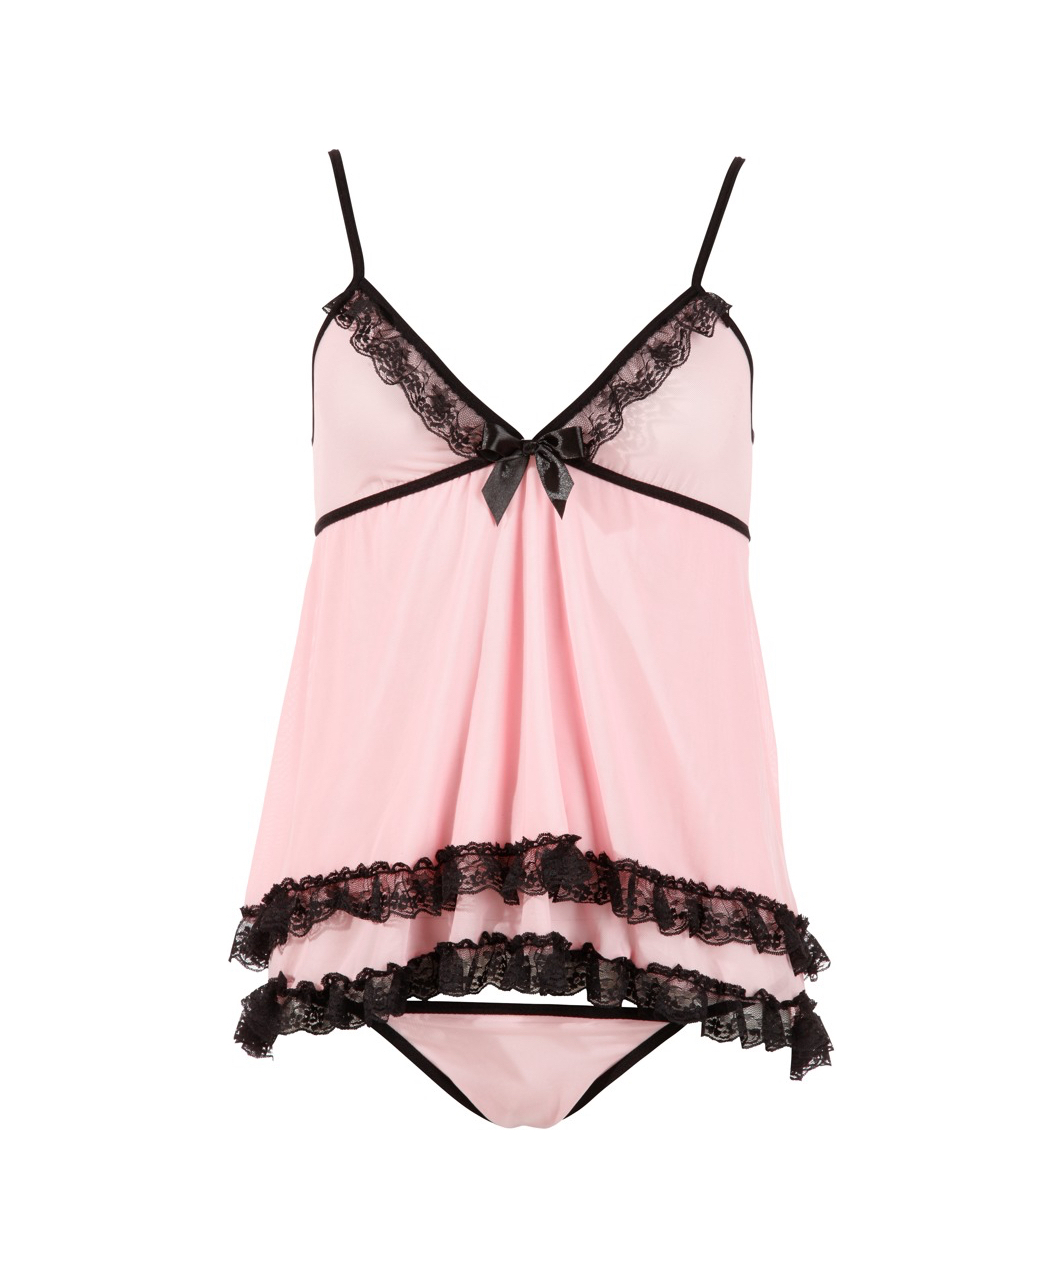 Cottelli Lingerie pink sheer mesh babydoll with black lace ruffles